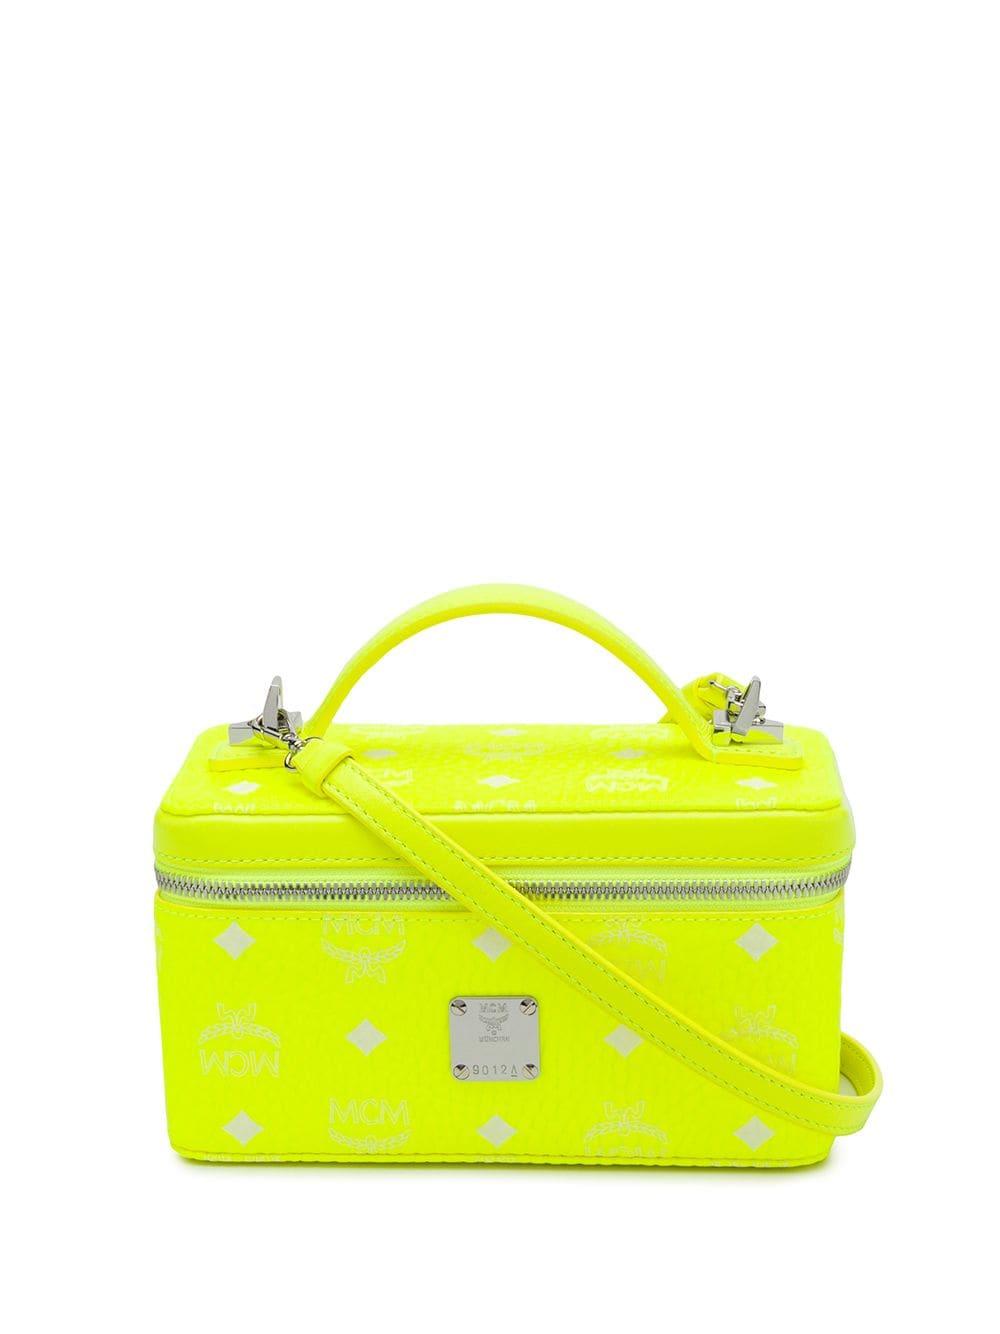 MCM Leather Neon Box Tote Bag in Yellow | Lyst Canada